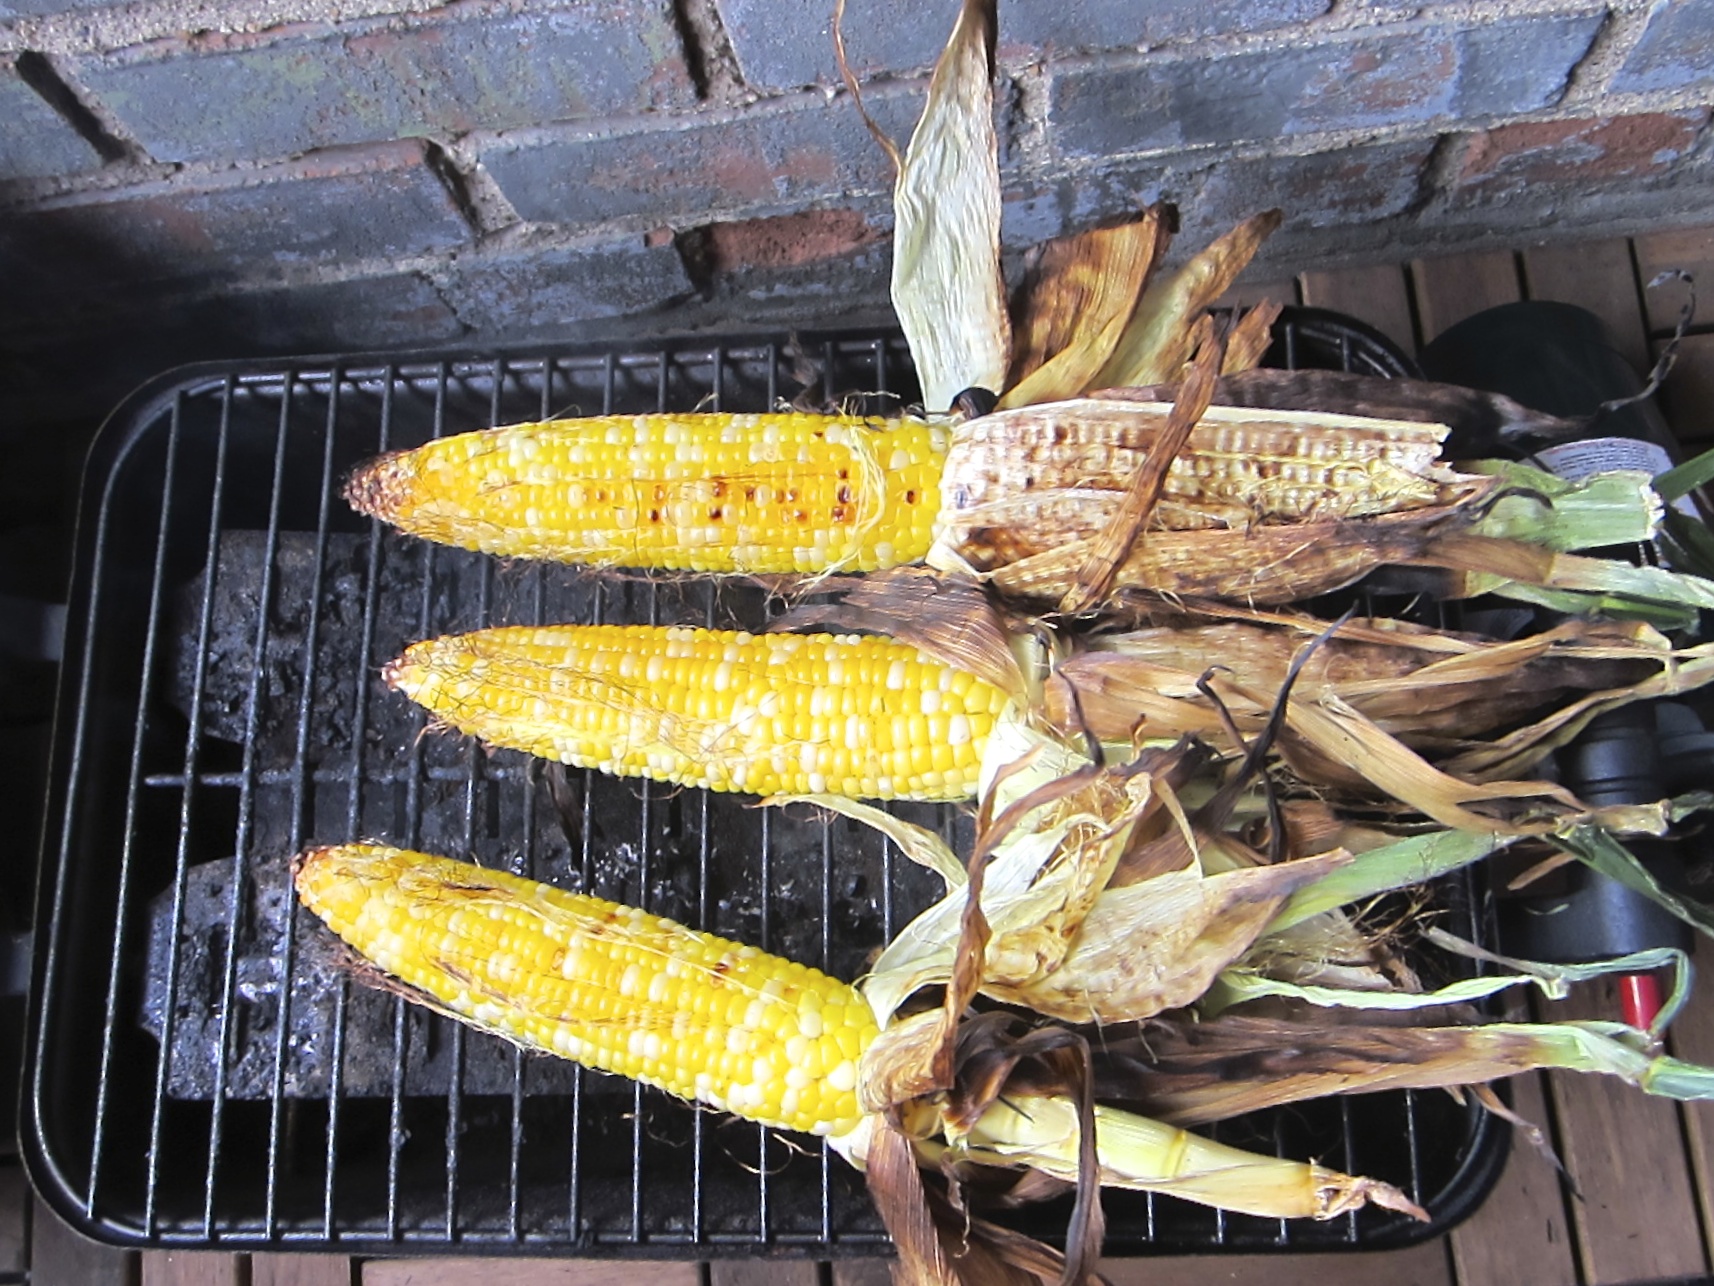 Barbequed corn